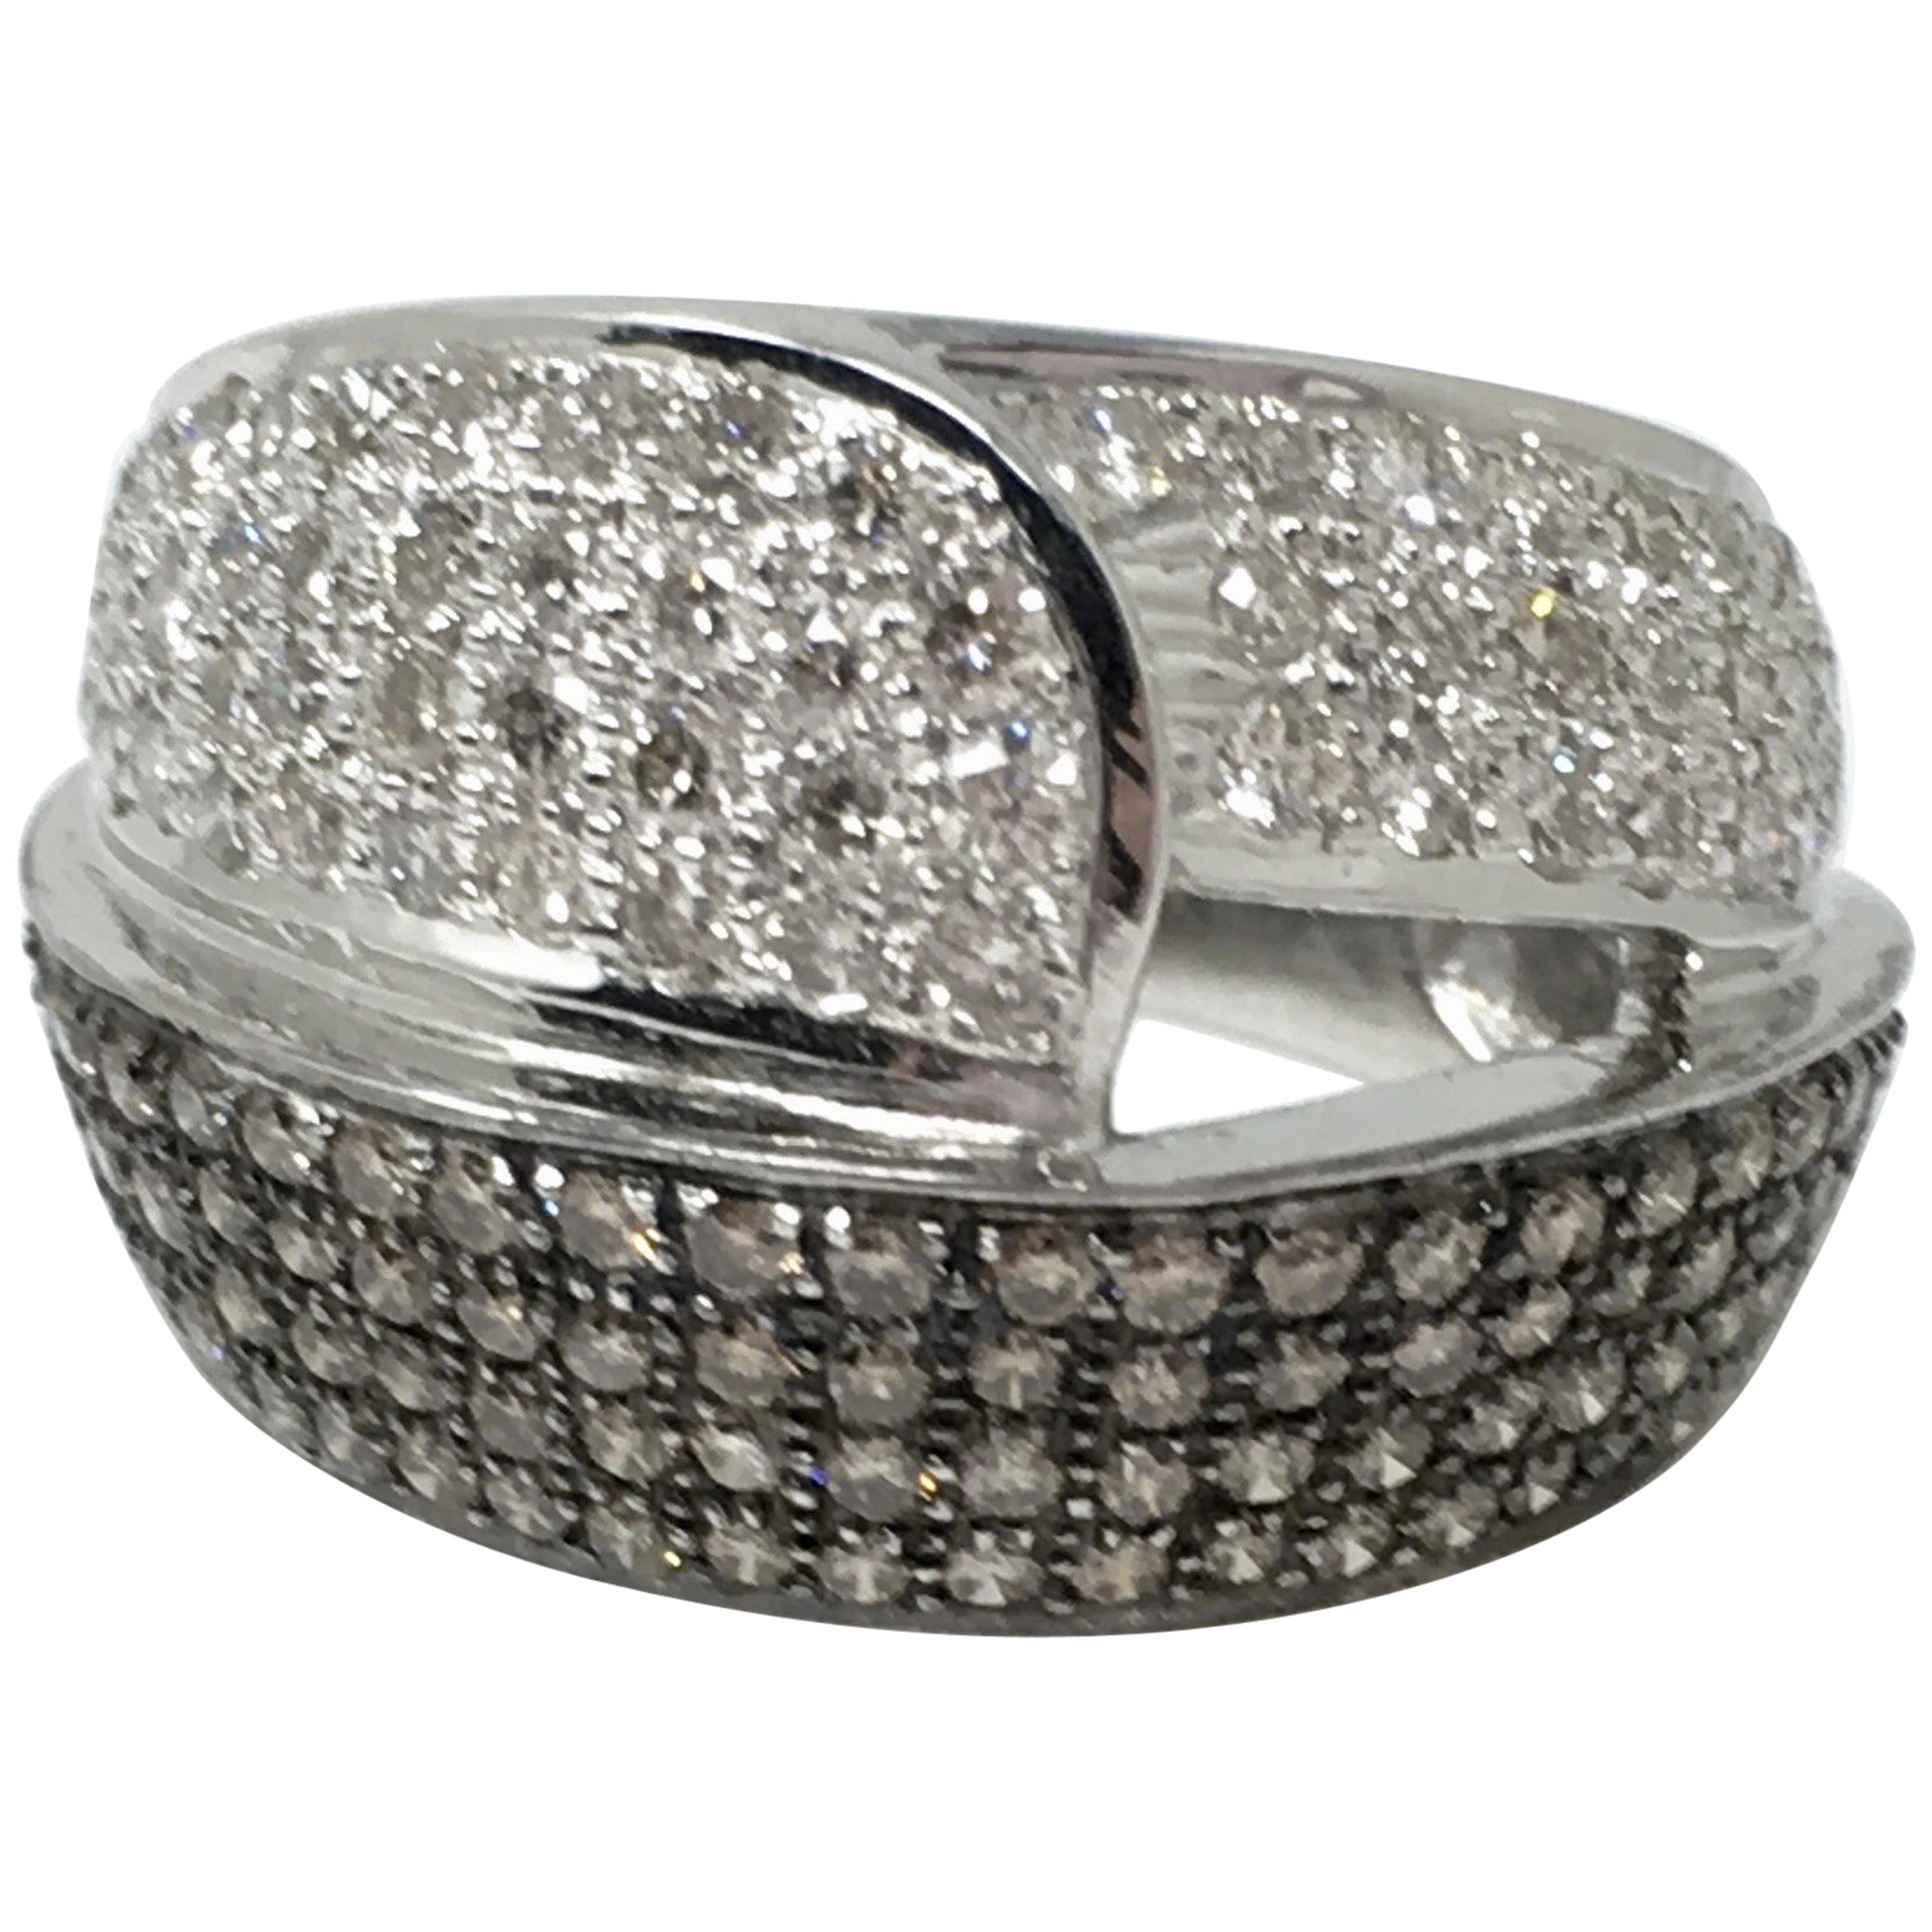 3.20 Carat White Round Brilliant Diamond And Brown Diamond Cocktail Ring In 18K  For Sale